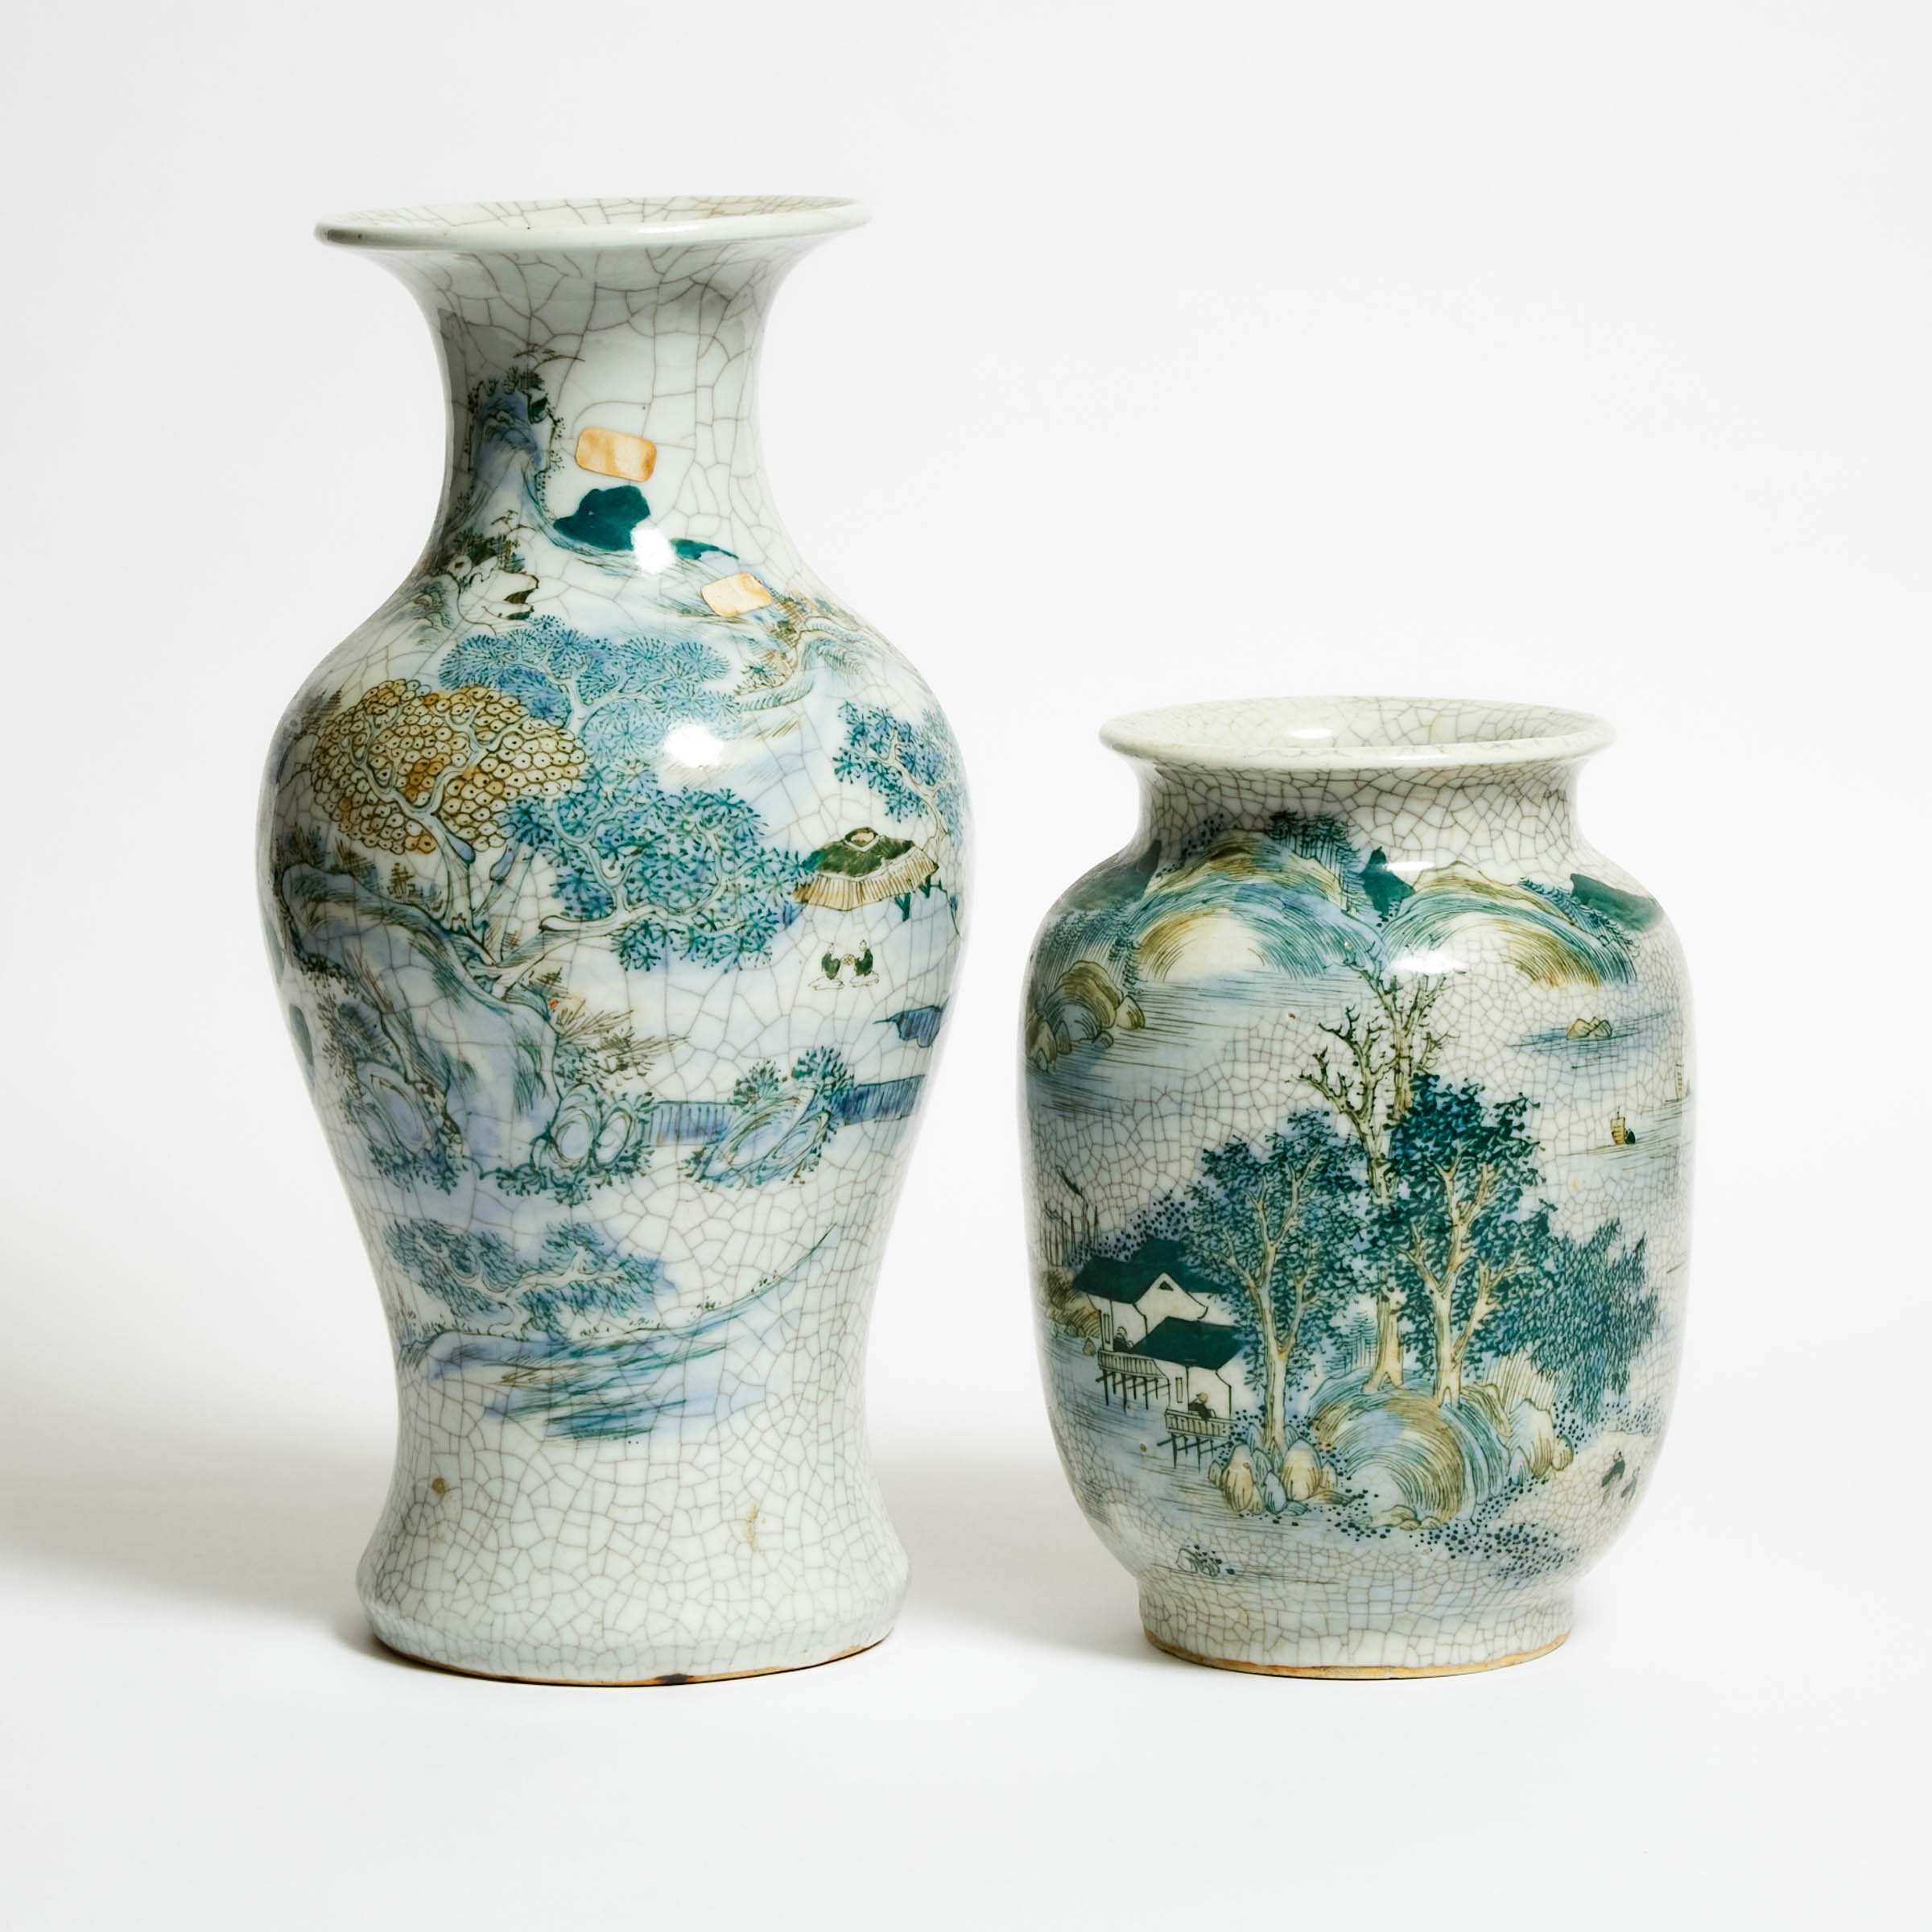 Two Chinese Painted Crackled Vases, Republican Period (1912-1949)